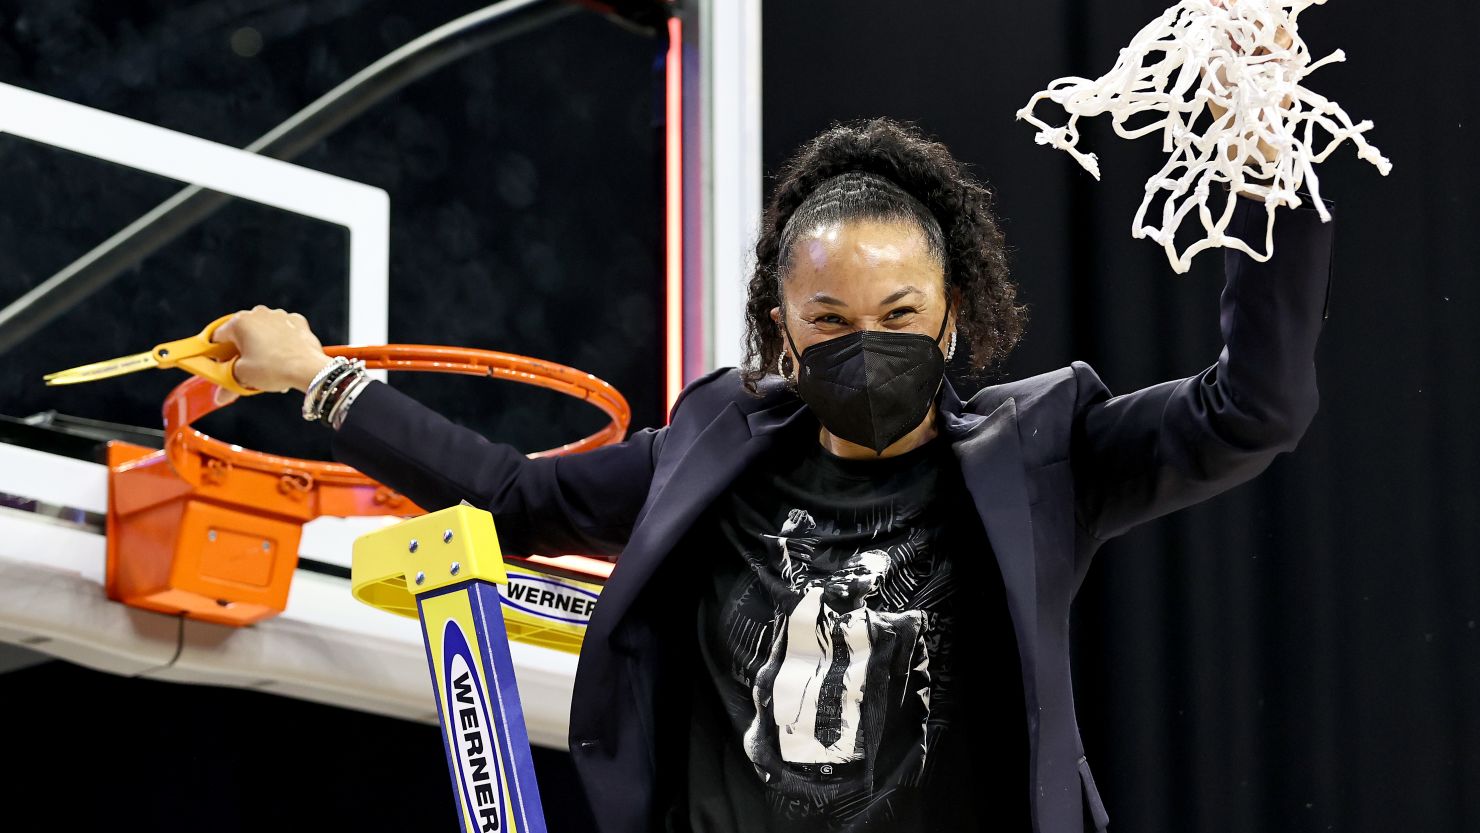 South Carolina head coach Dawn Staley celebrates after cutting the last piece of the net during the Elite Eight round of the NCAA Women's Basketball Tournament.